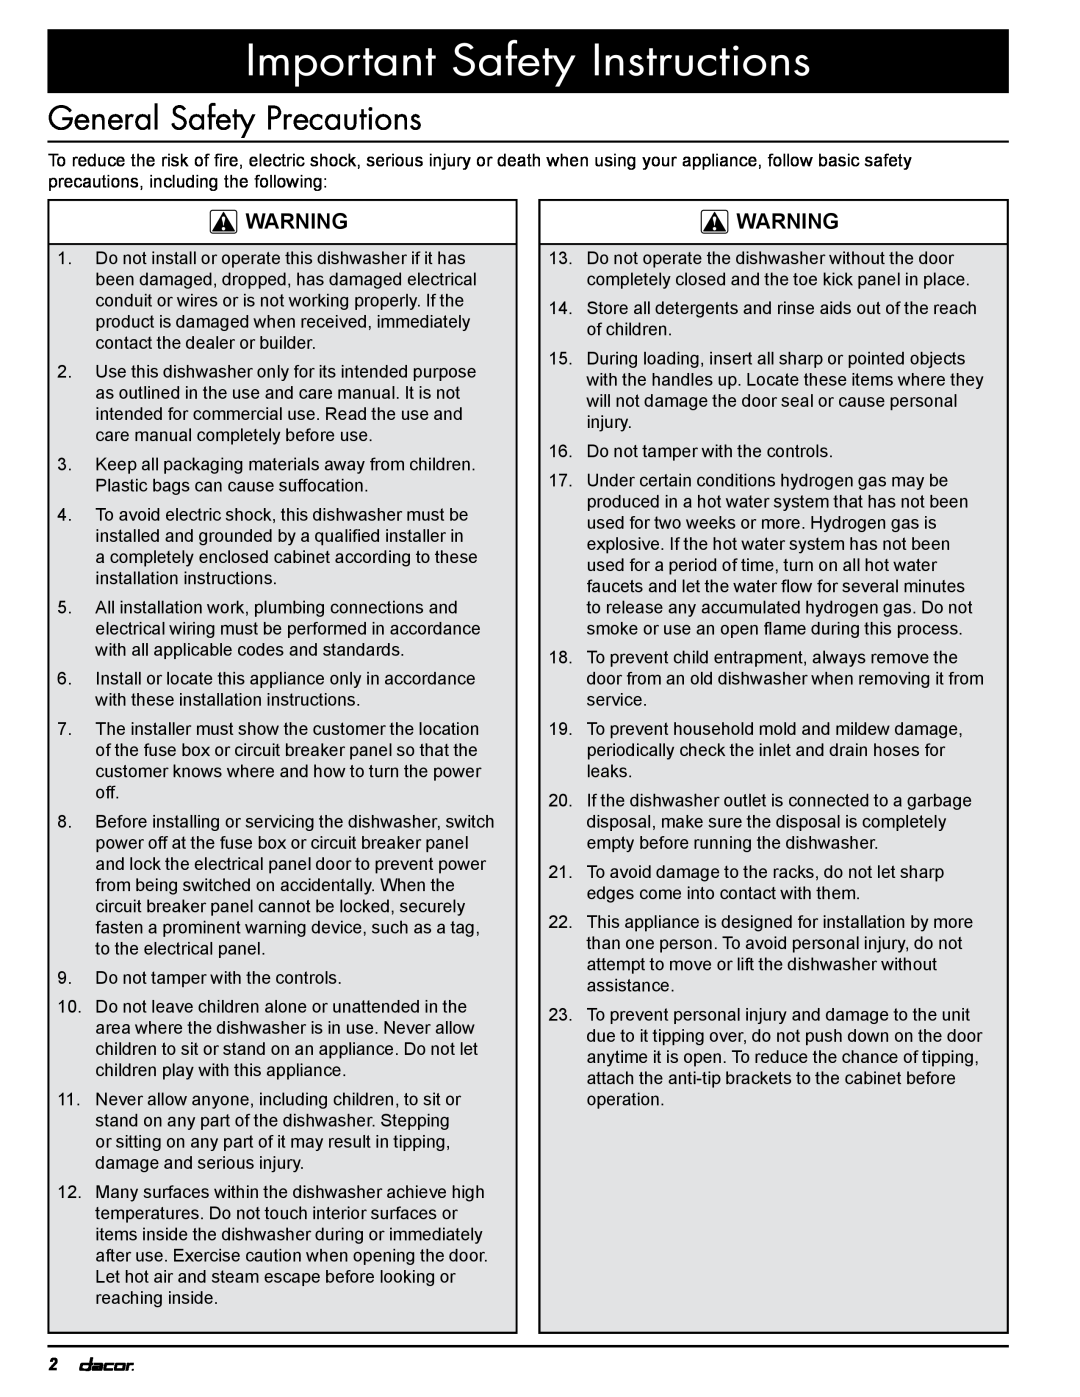 Dacor 24GN, PD installation instructions General Safety Precautions, Important Safety Instructions 